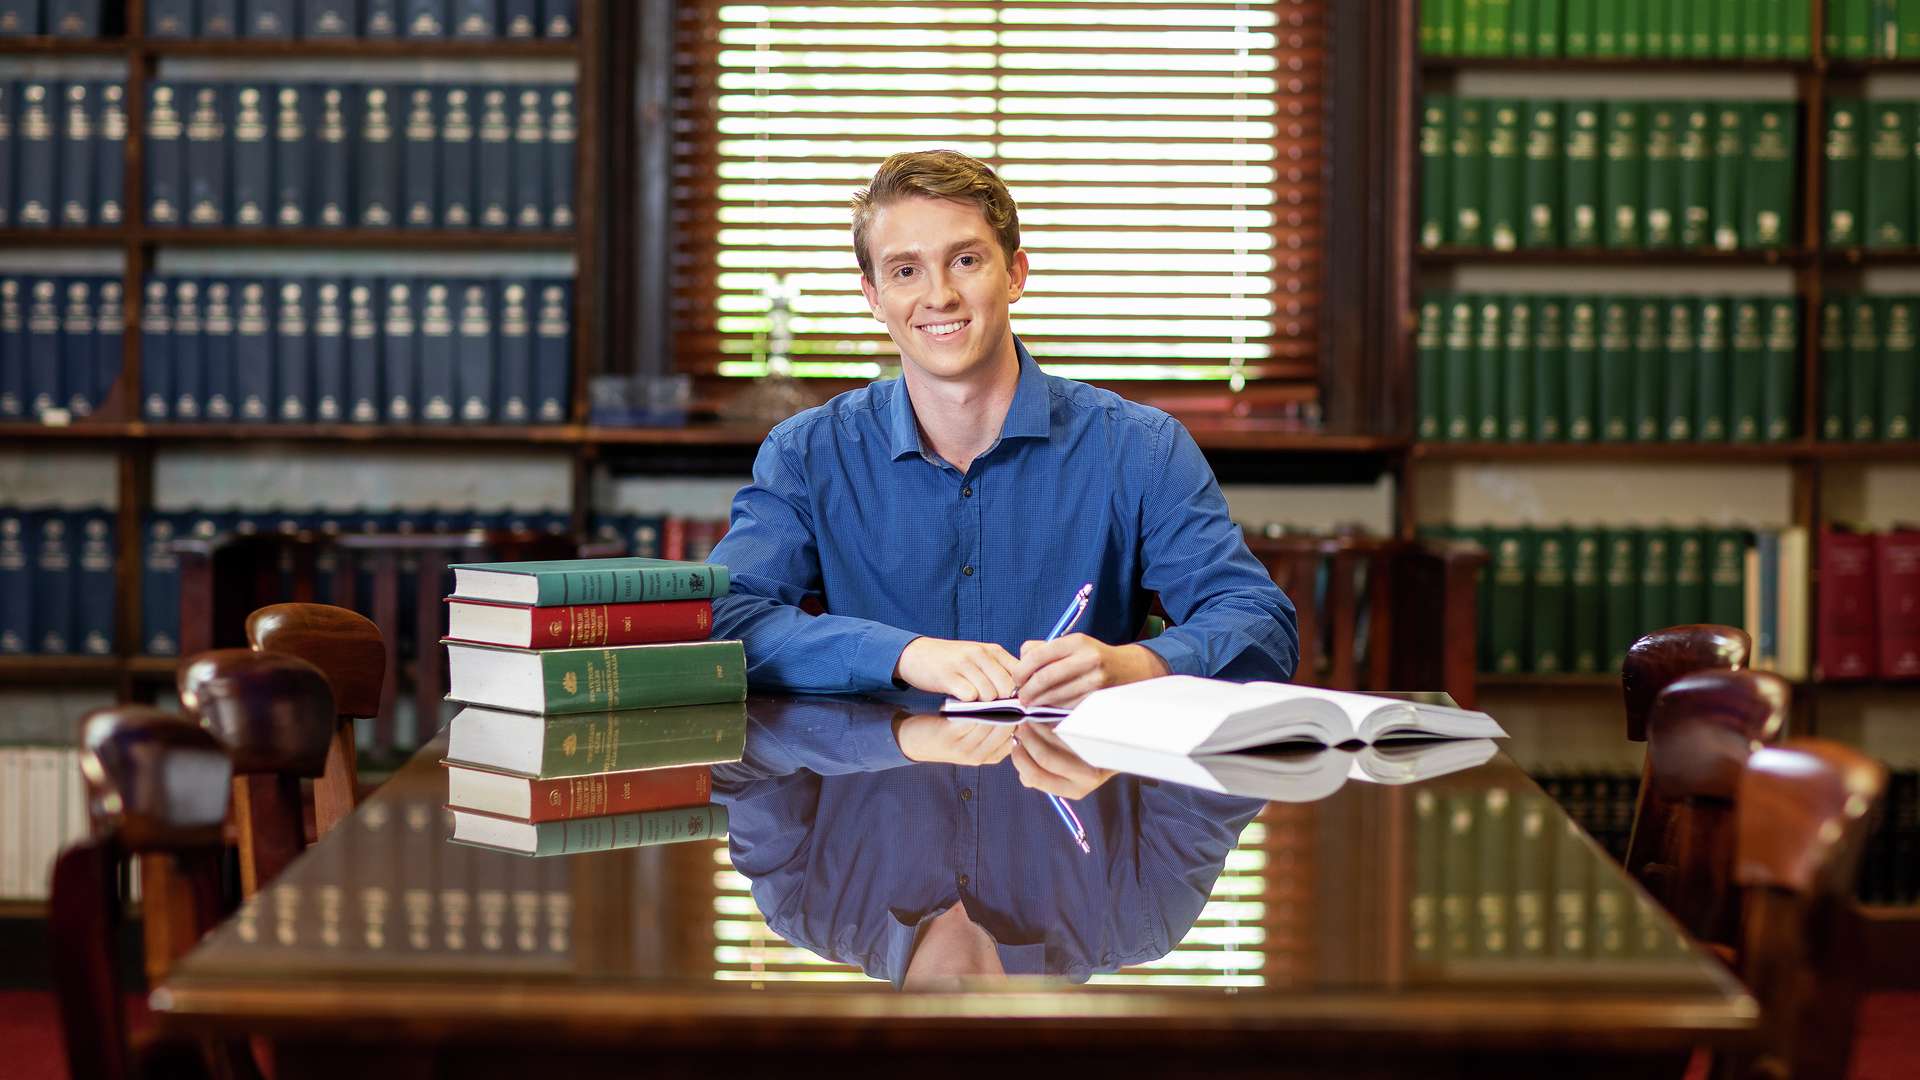 A Law student sits at a large mahogany desk in a library studying and smiling at the camera.